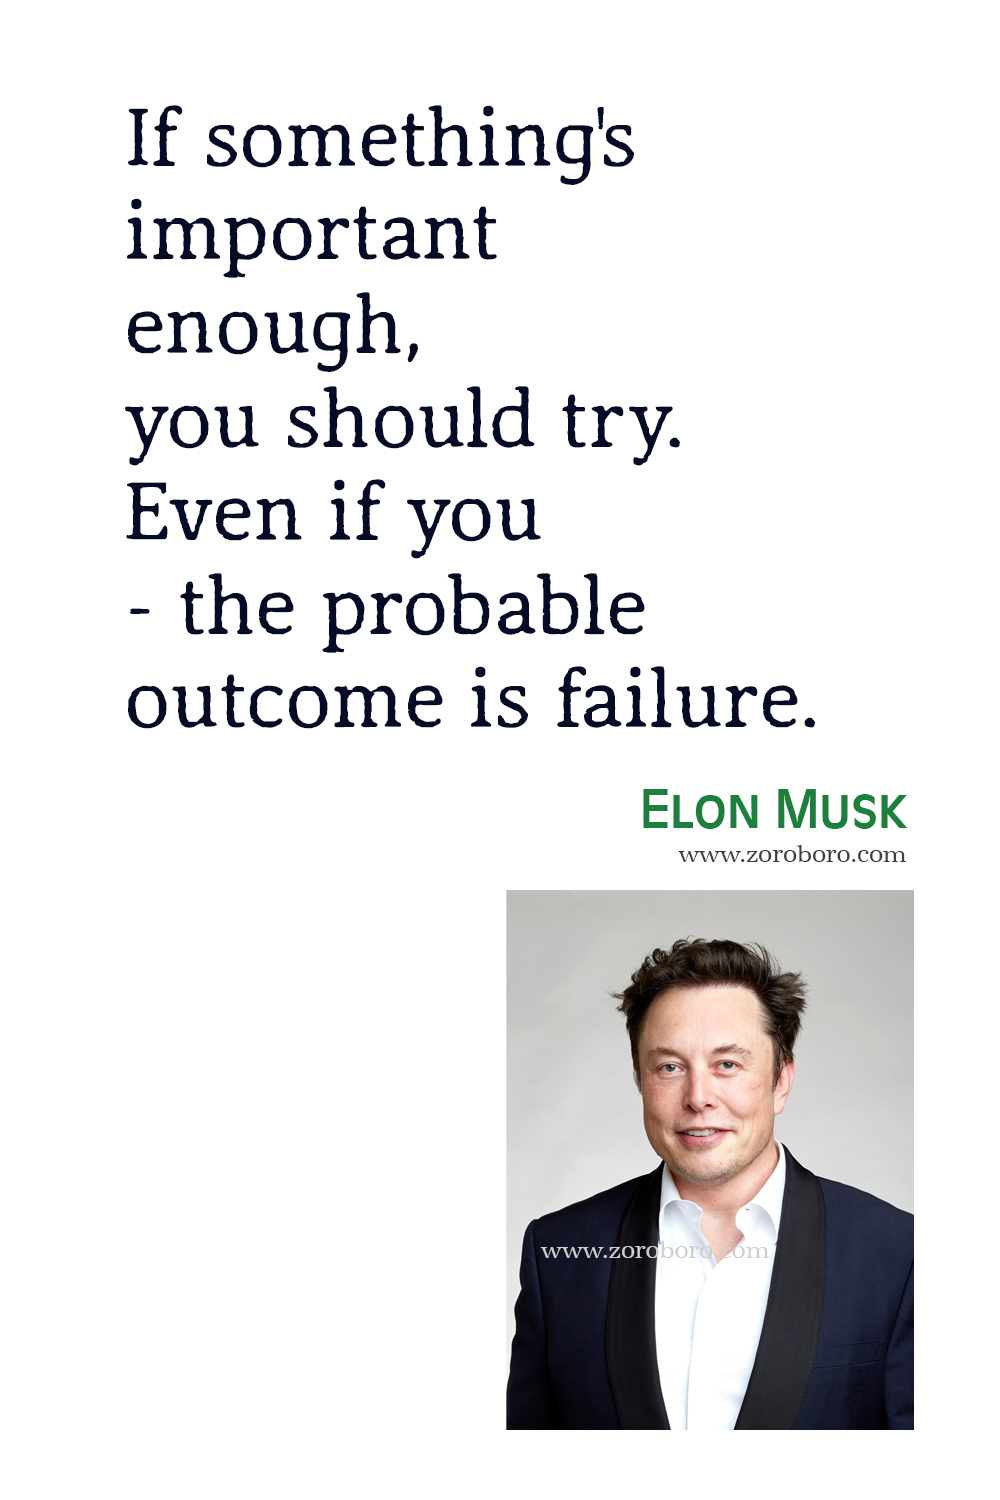 Elon Musk Quotes, Elon Musk Inspirational Quotes, Elon Musk Technology Quotes, Elon Musk: Tesla, SpaceX, and the Quest for a Fantastic Future, Elon Musk .